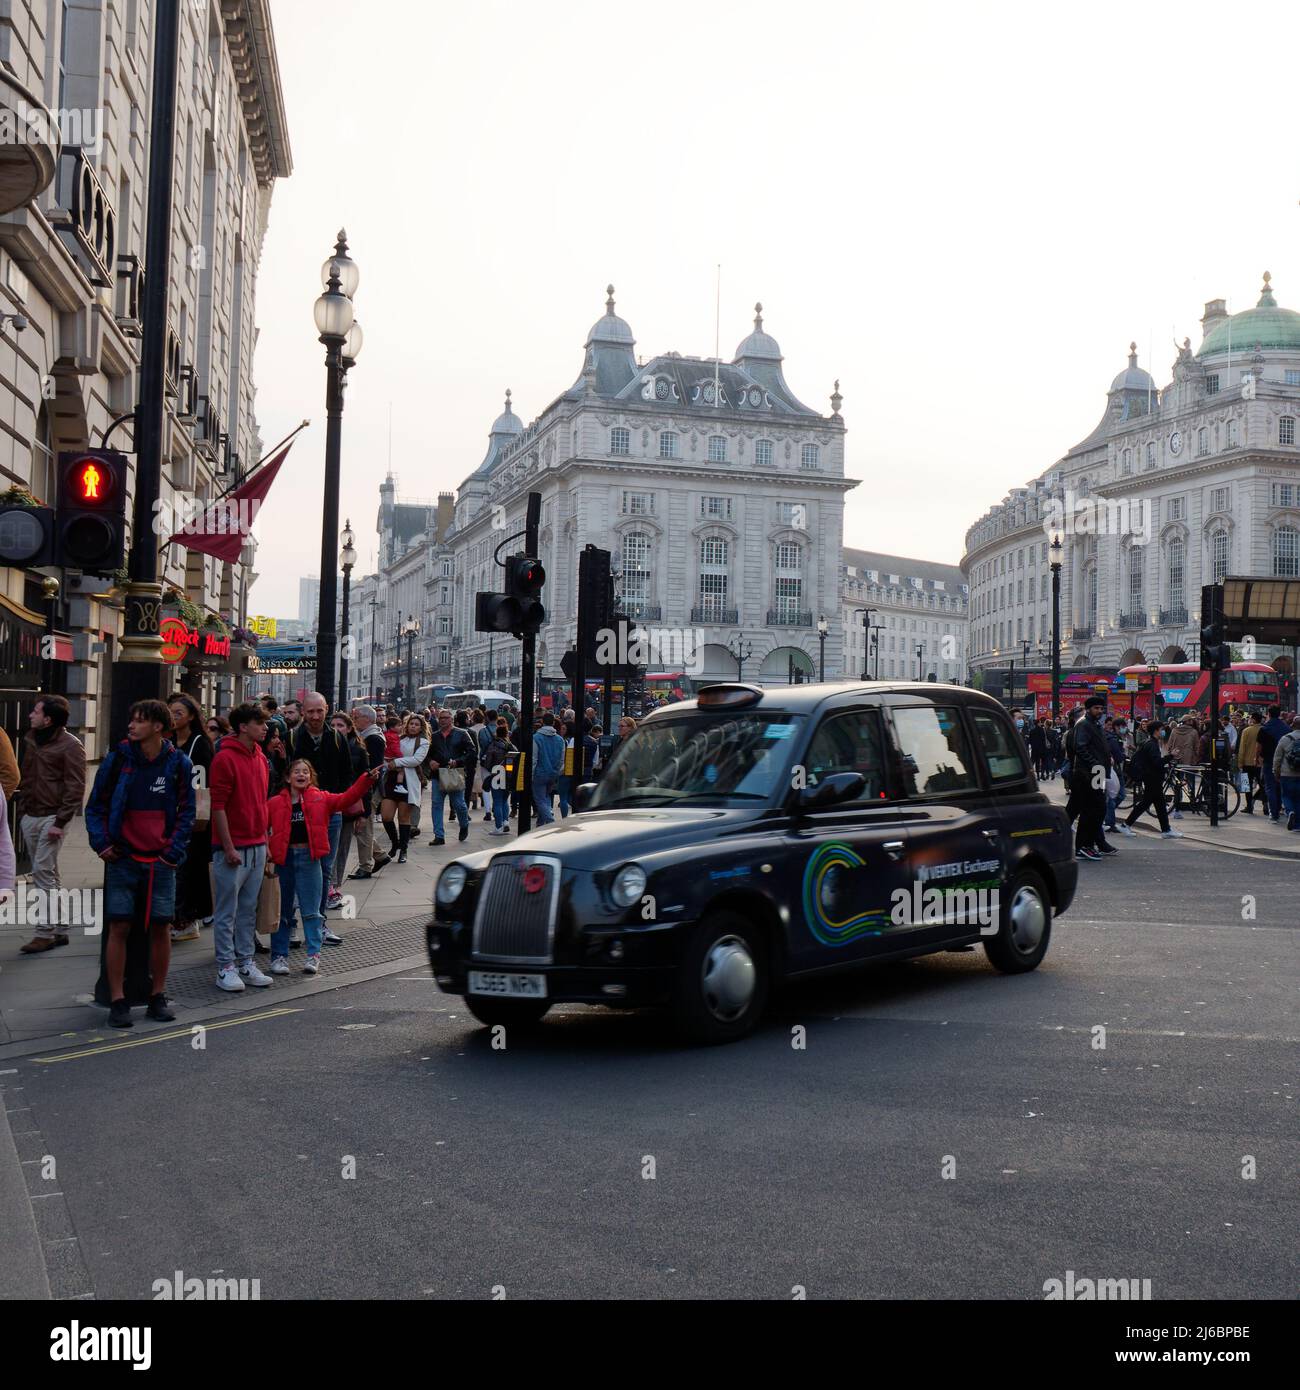 London, Greater London, England, April 23 2022: Taxi aka Cab in Piccadilly Circus as people wait at the pedestrian crossing. Stock Photo